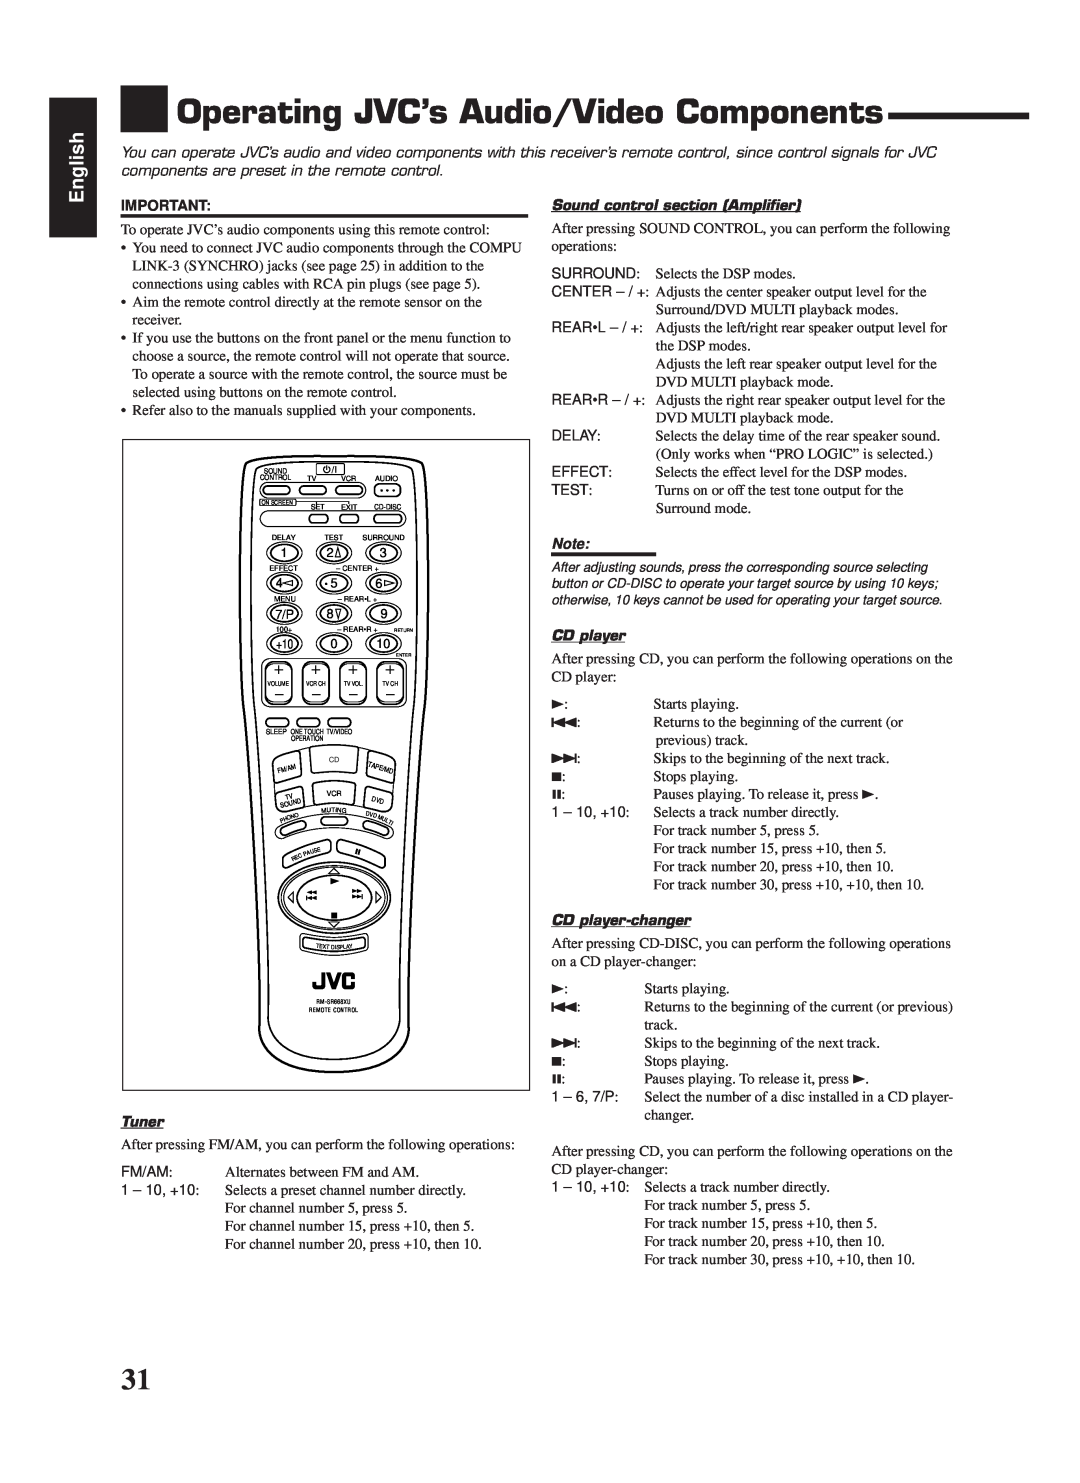 JVC RX-669PGD manual Operating JVC’s Audio/Video Components, English, Tuner, Sound control section Amplifier, CD player 